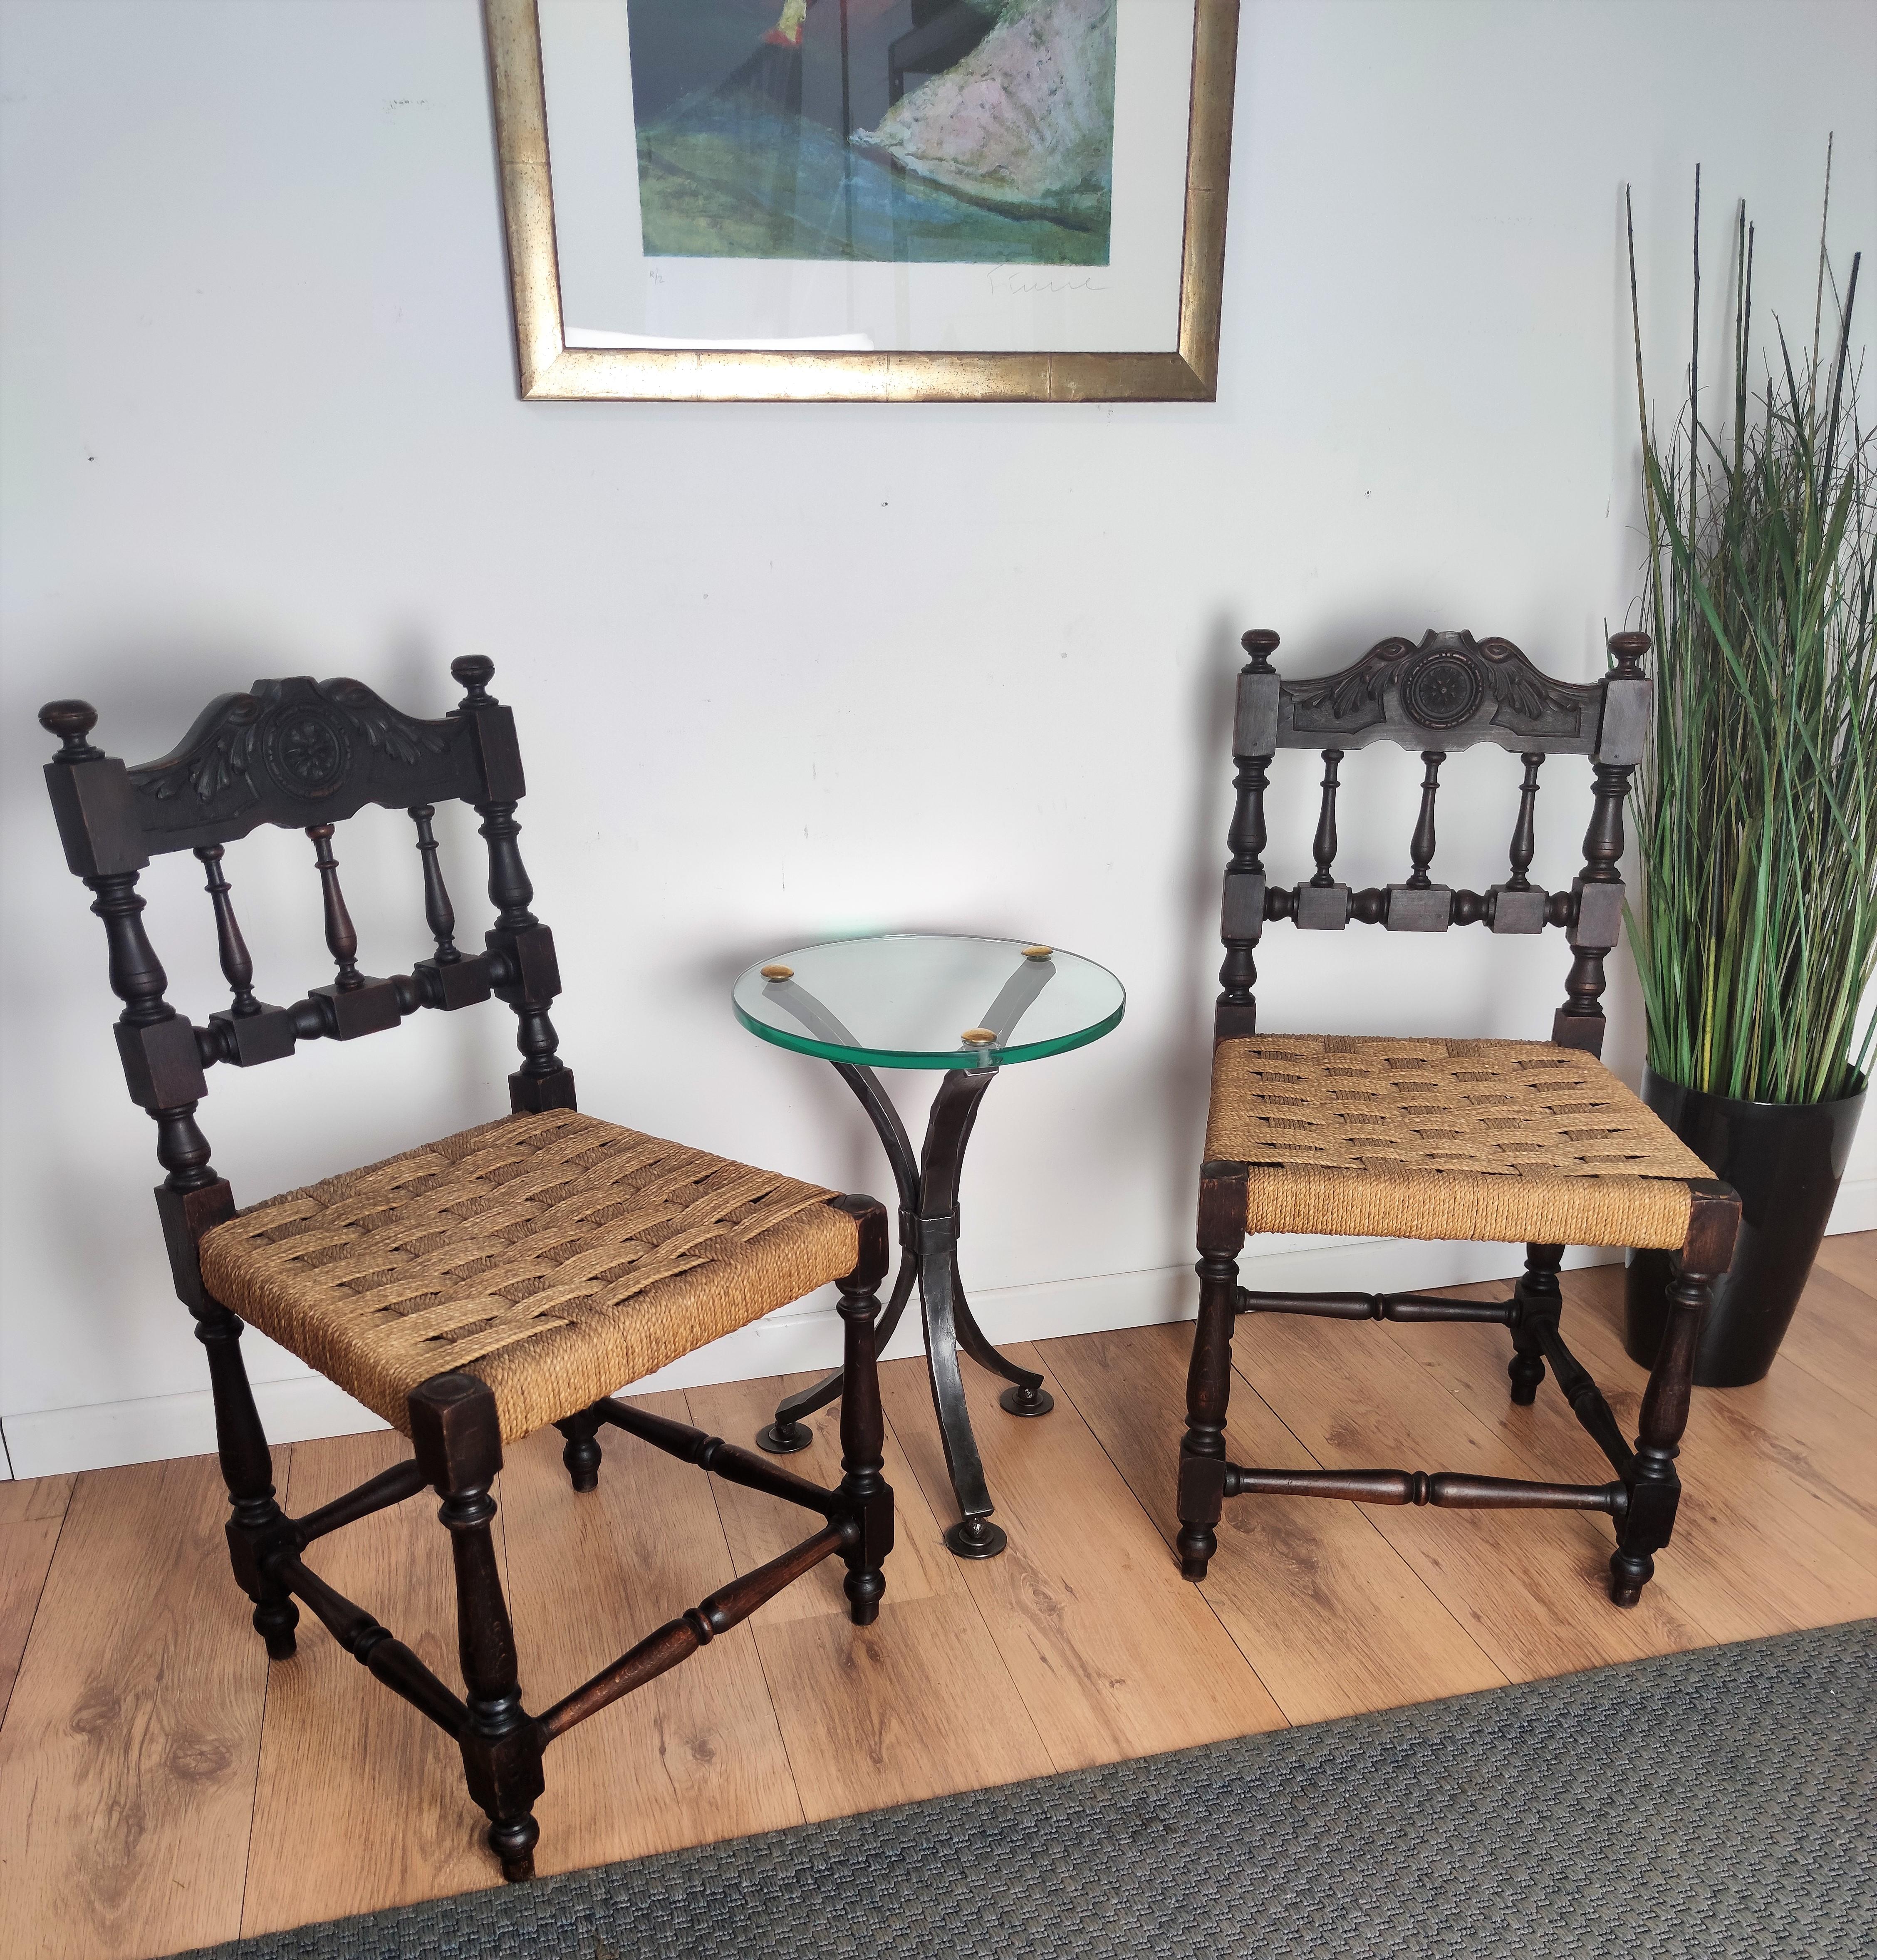 Stylish pair of 1960s Mid-Century Modern chairs or stools in wood and cord or woven rope, in the style of Audoux Minet with carved decorated back. The traditional and classical design and shape of the wooden structure, typical of Mid-Century Modern